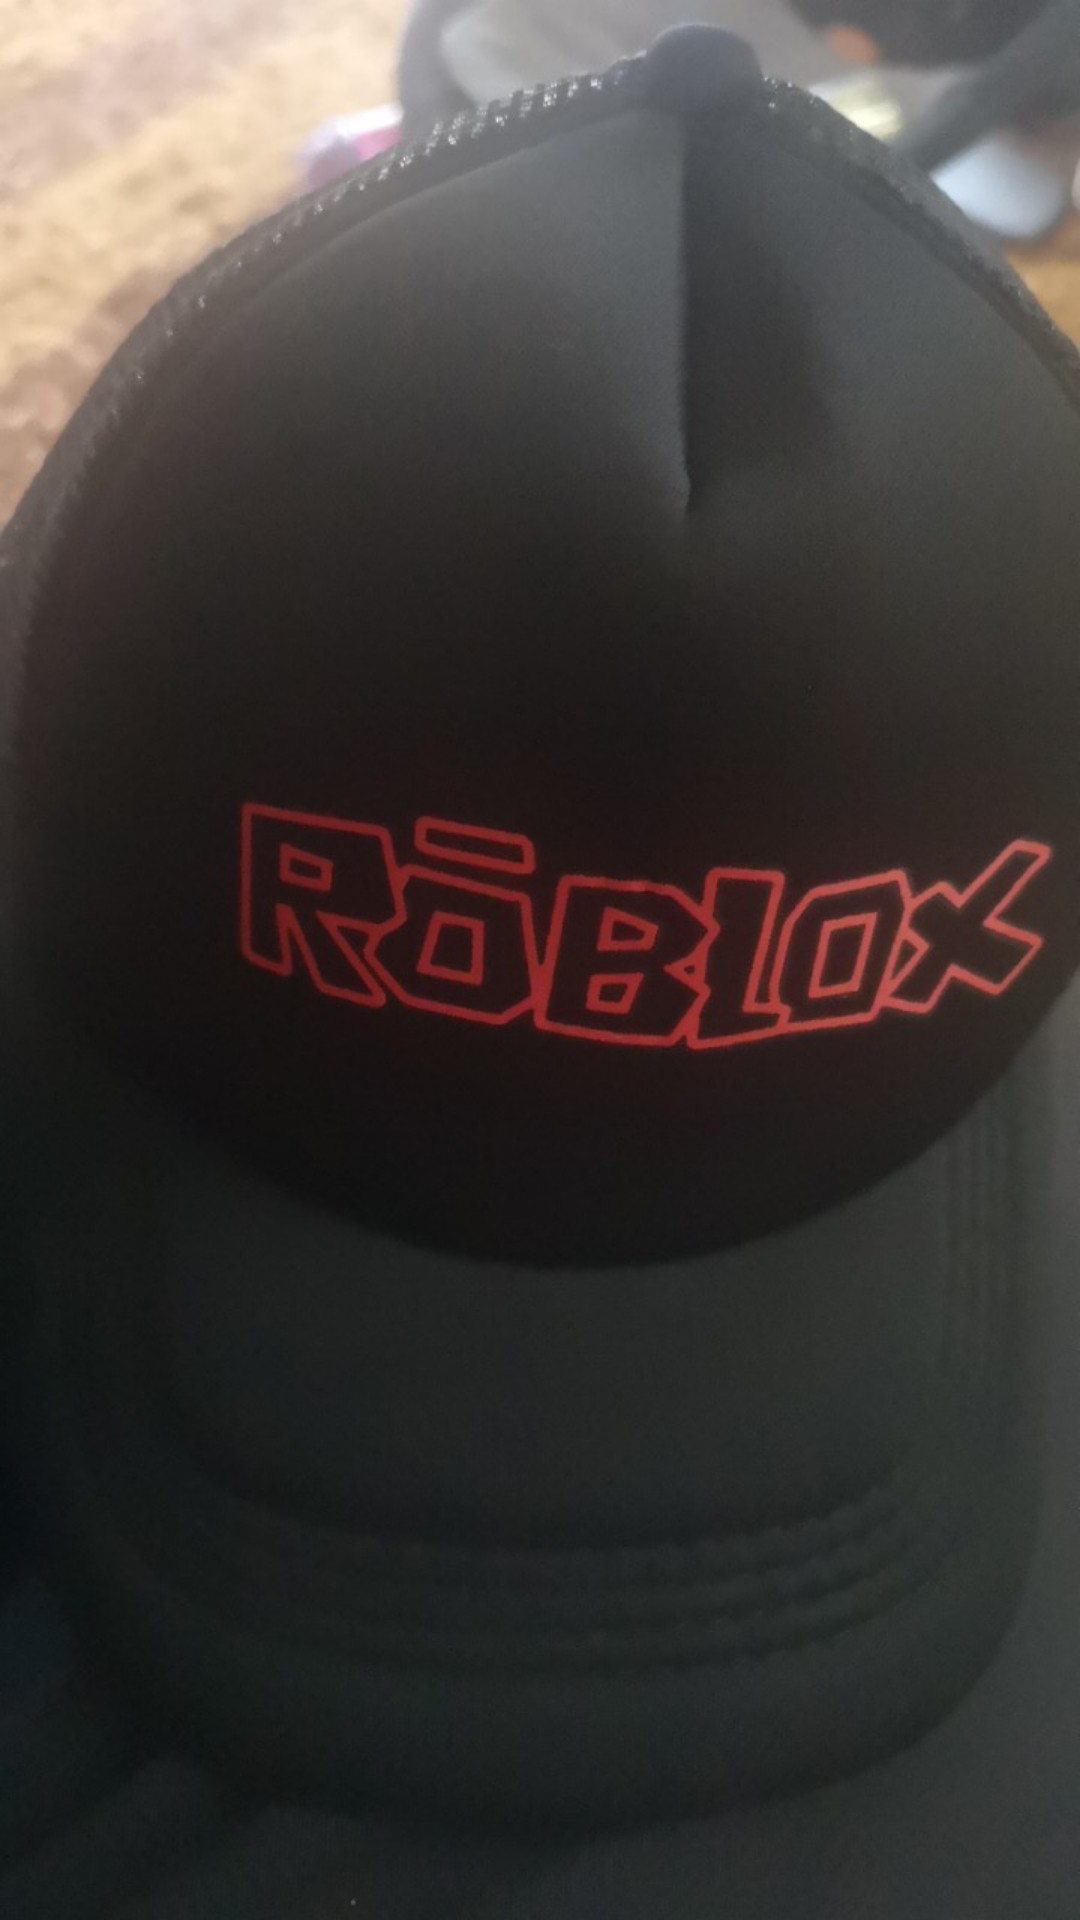 2020 New 6 Styles Roblox Kids Hats Adjustable Cartoon Summer Games Printed Baseball Caps Fashion Boy Kids Hats By Best4u Shopee Malaysia - 2019 adjustable game roblox cap kids baby girl boy summer sun hats caps cartoon baseball snapback hats childrens birthday party gift from jiayanbaby